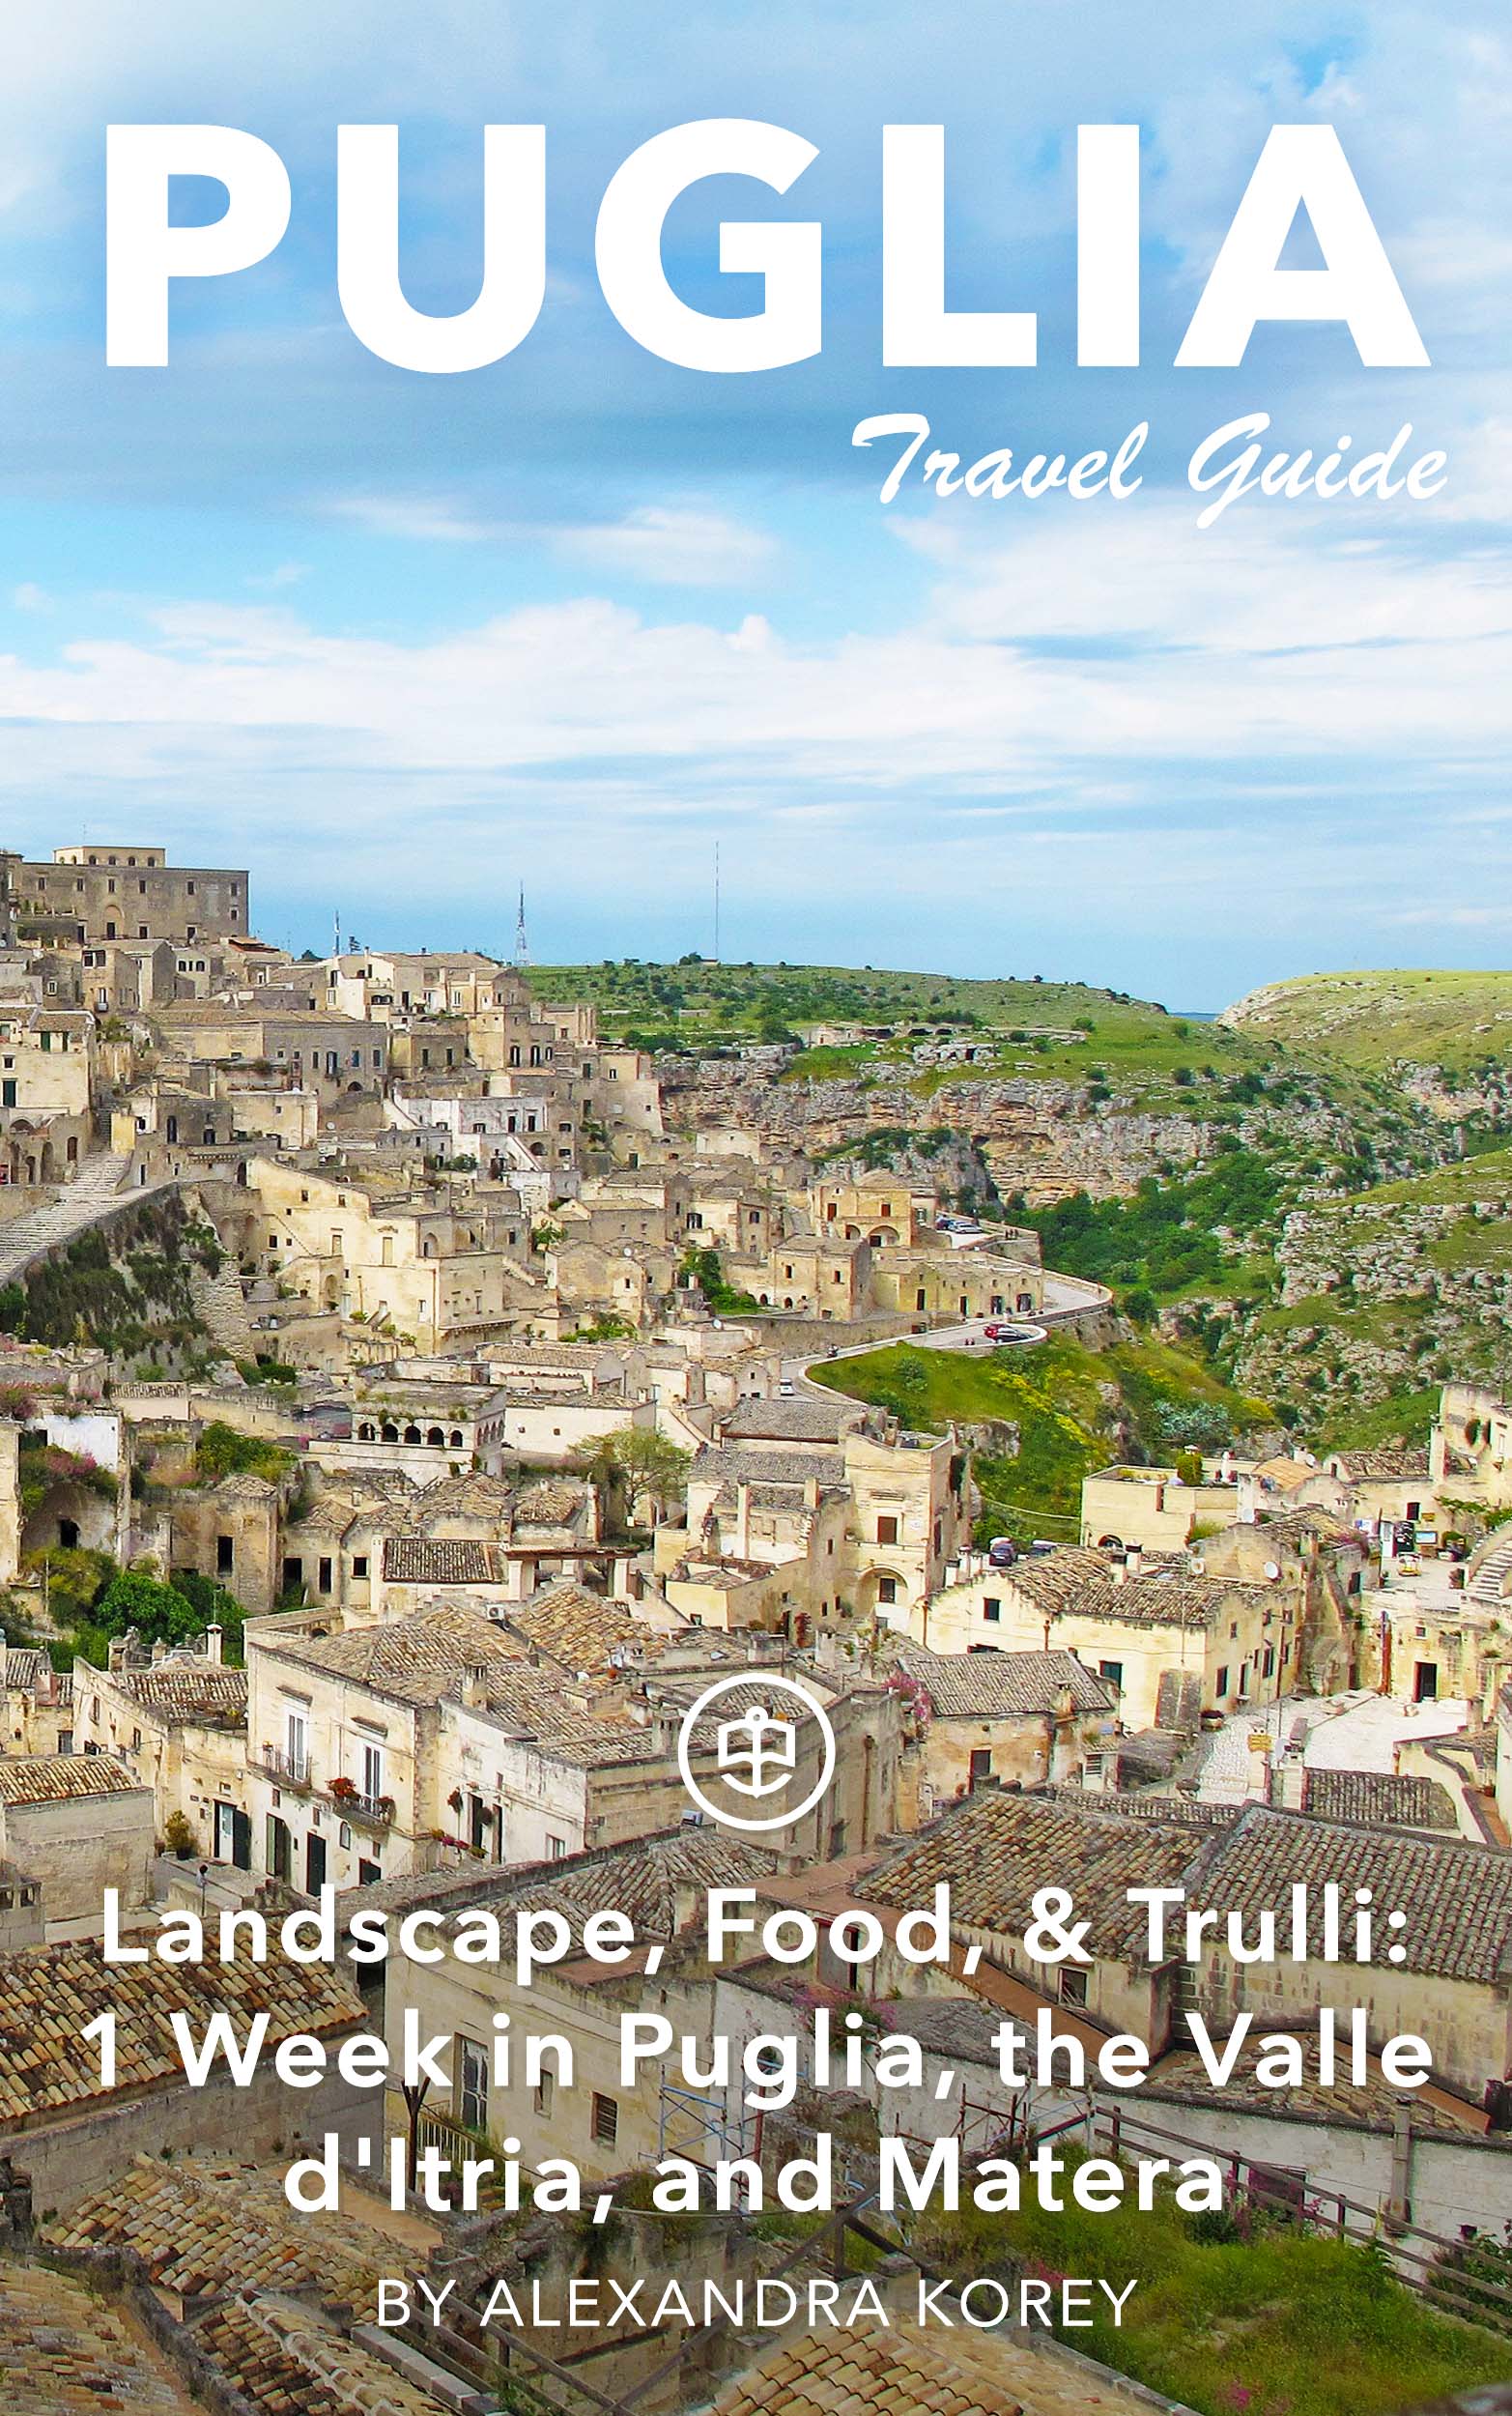 Landscape, Food, & Trulli: 1 Week in Puglia, the Valle d'Itria, and Matera